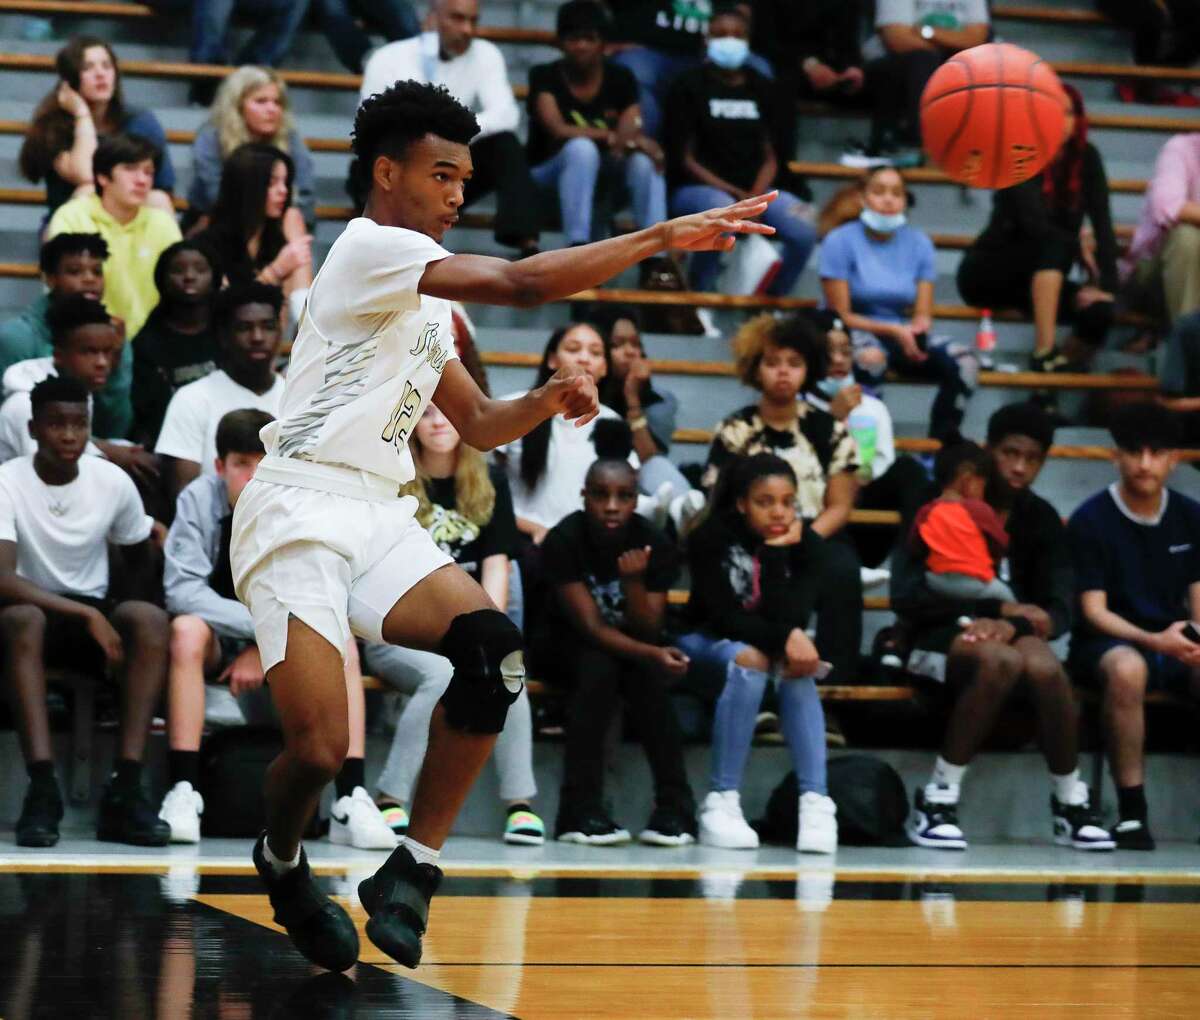 Conroe point guard Niglel Leday (12) makes a turnover during the first quarter of a non-district high school basketball game at Conroe High School, Friday, Dec. 3, 2021, in Conroe.